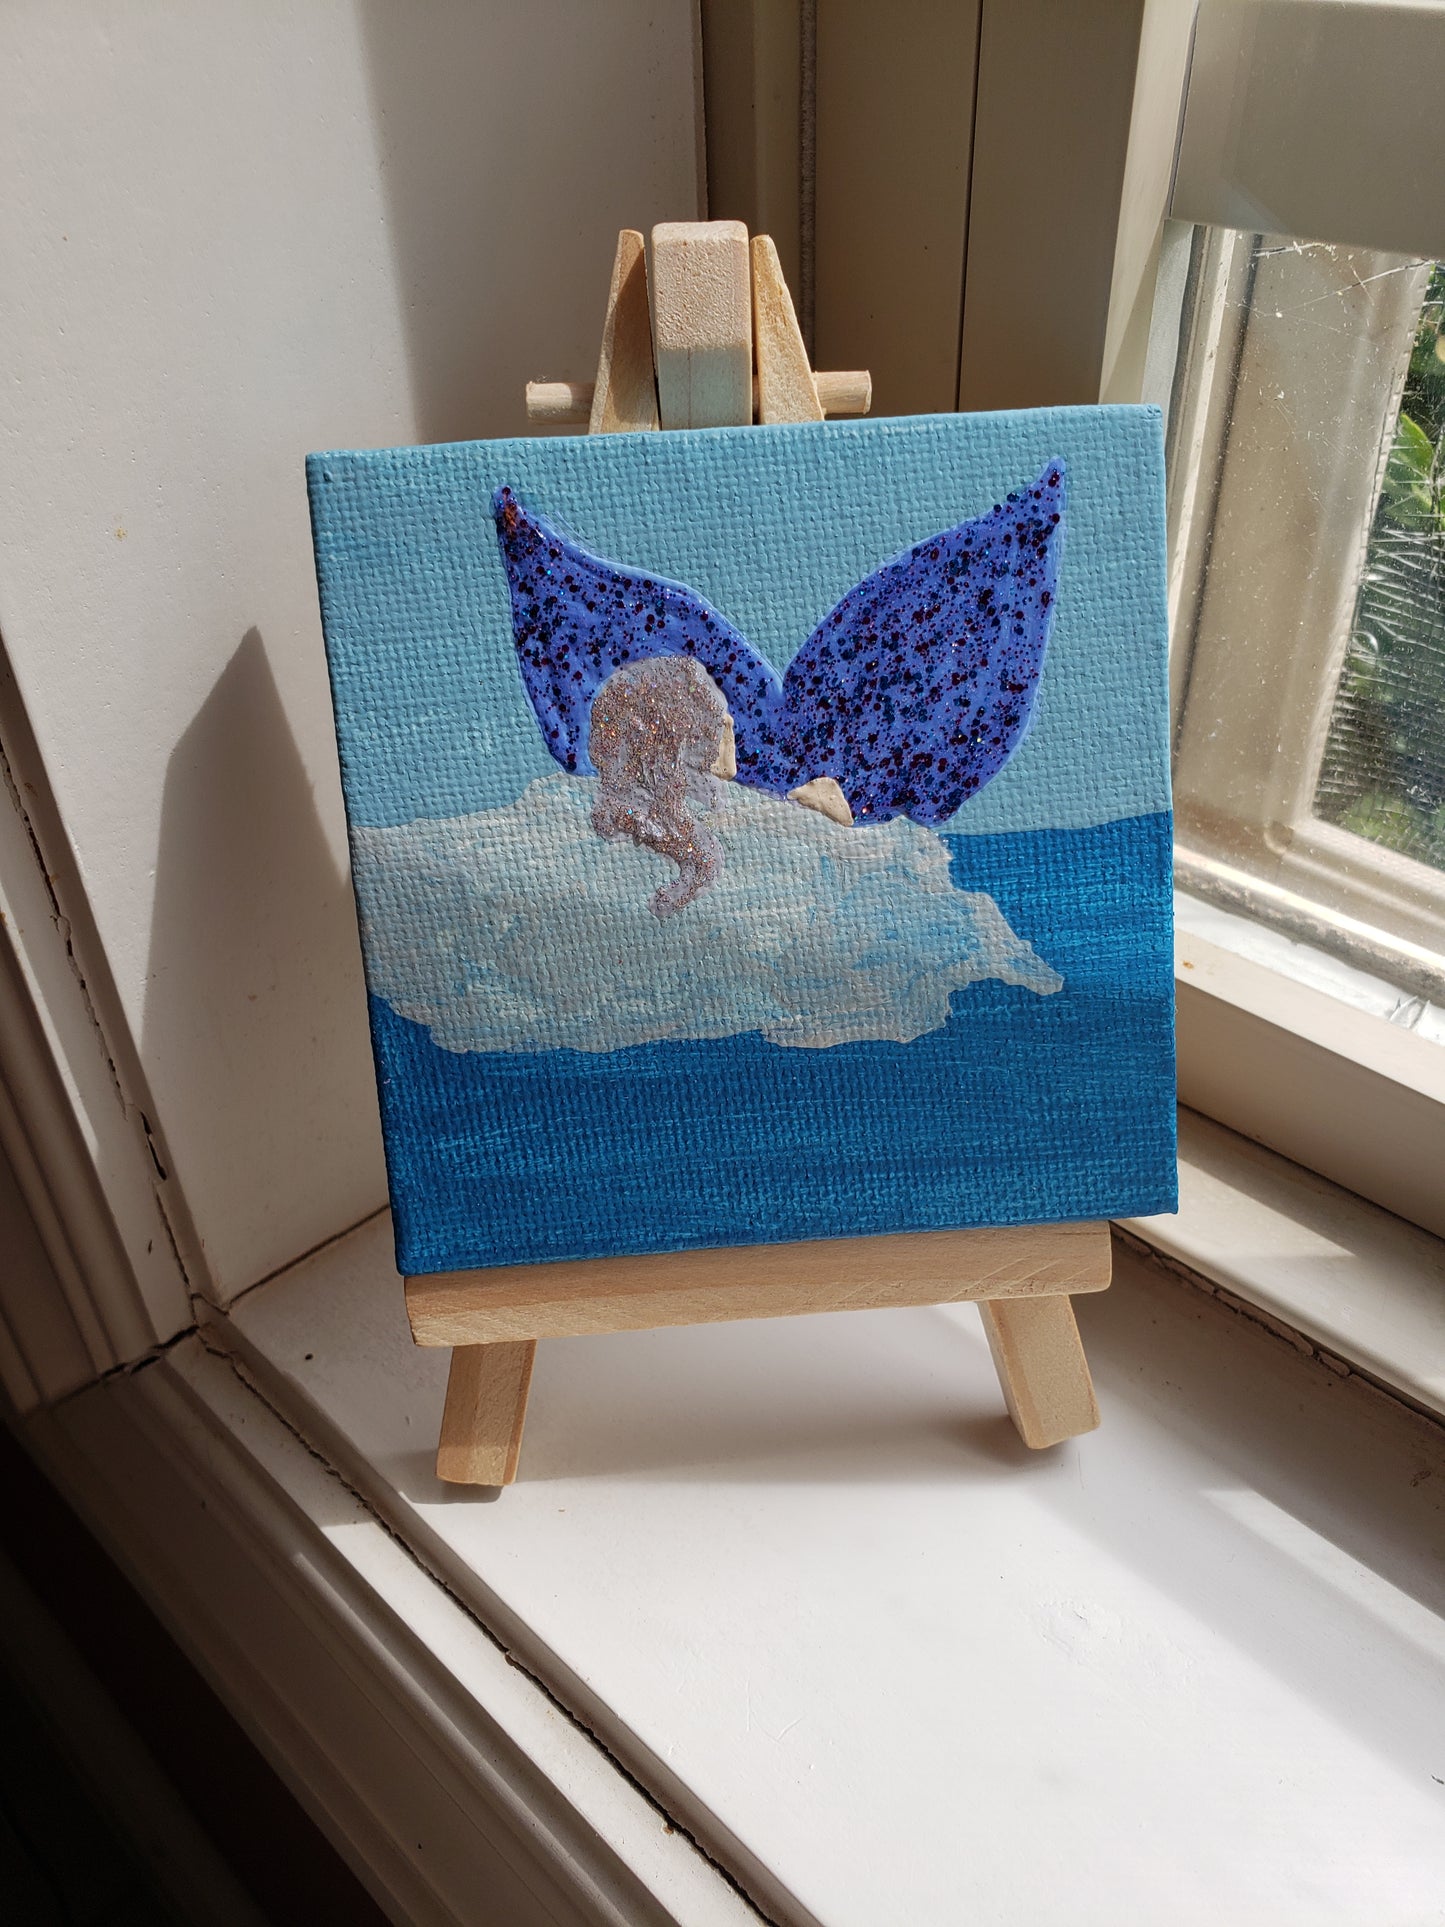 Glacier Snow Ice Mermaid Blue Periwinkle White Purple Tail Glitter Easel Painting